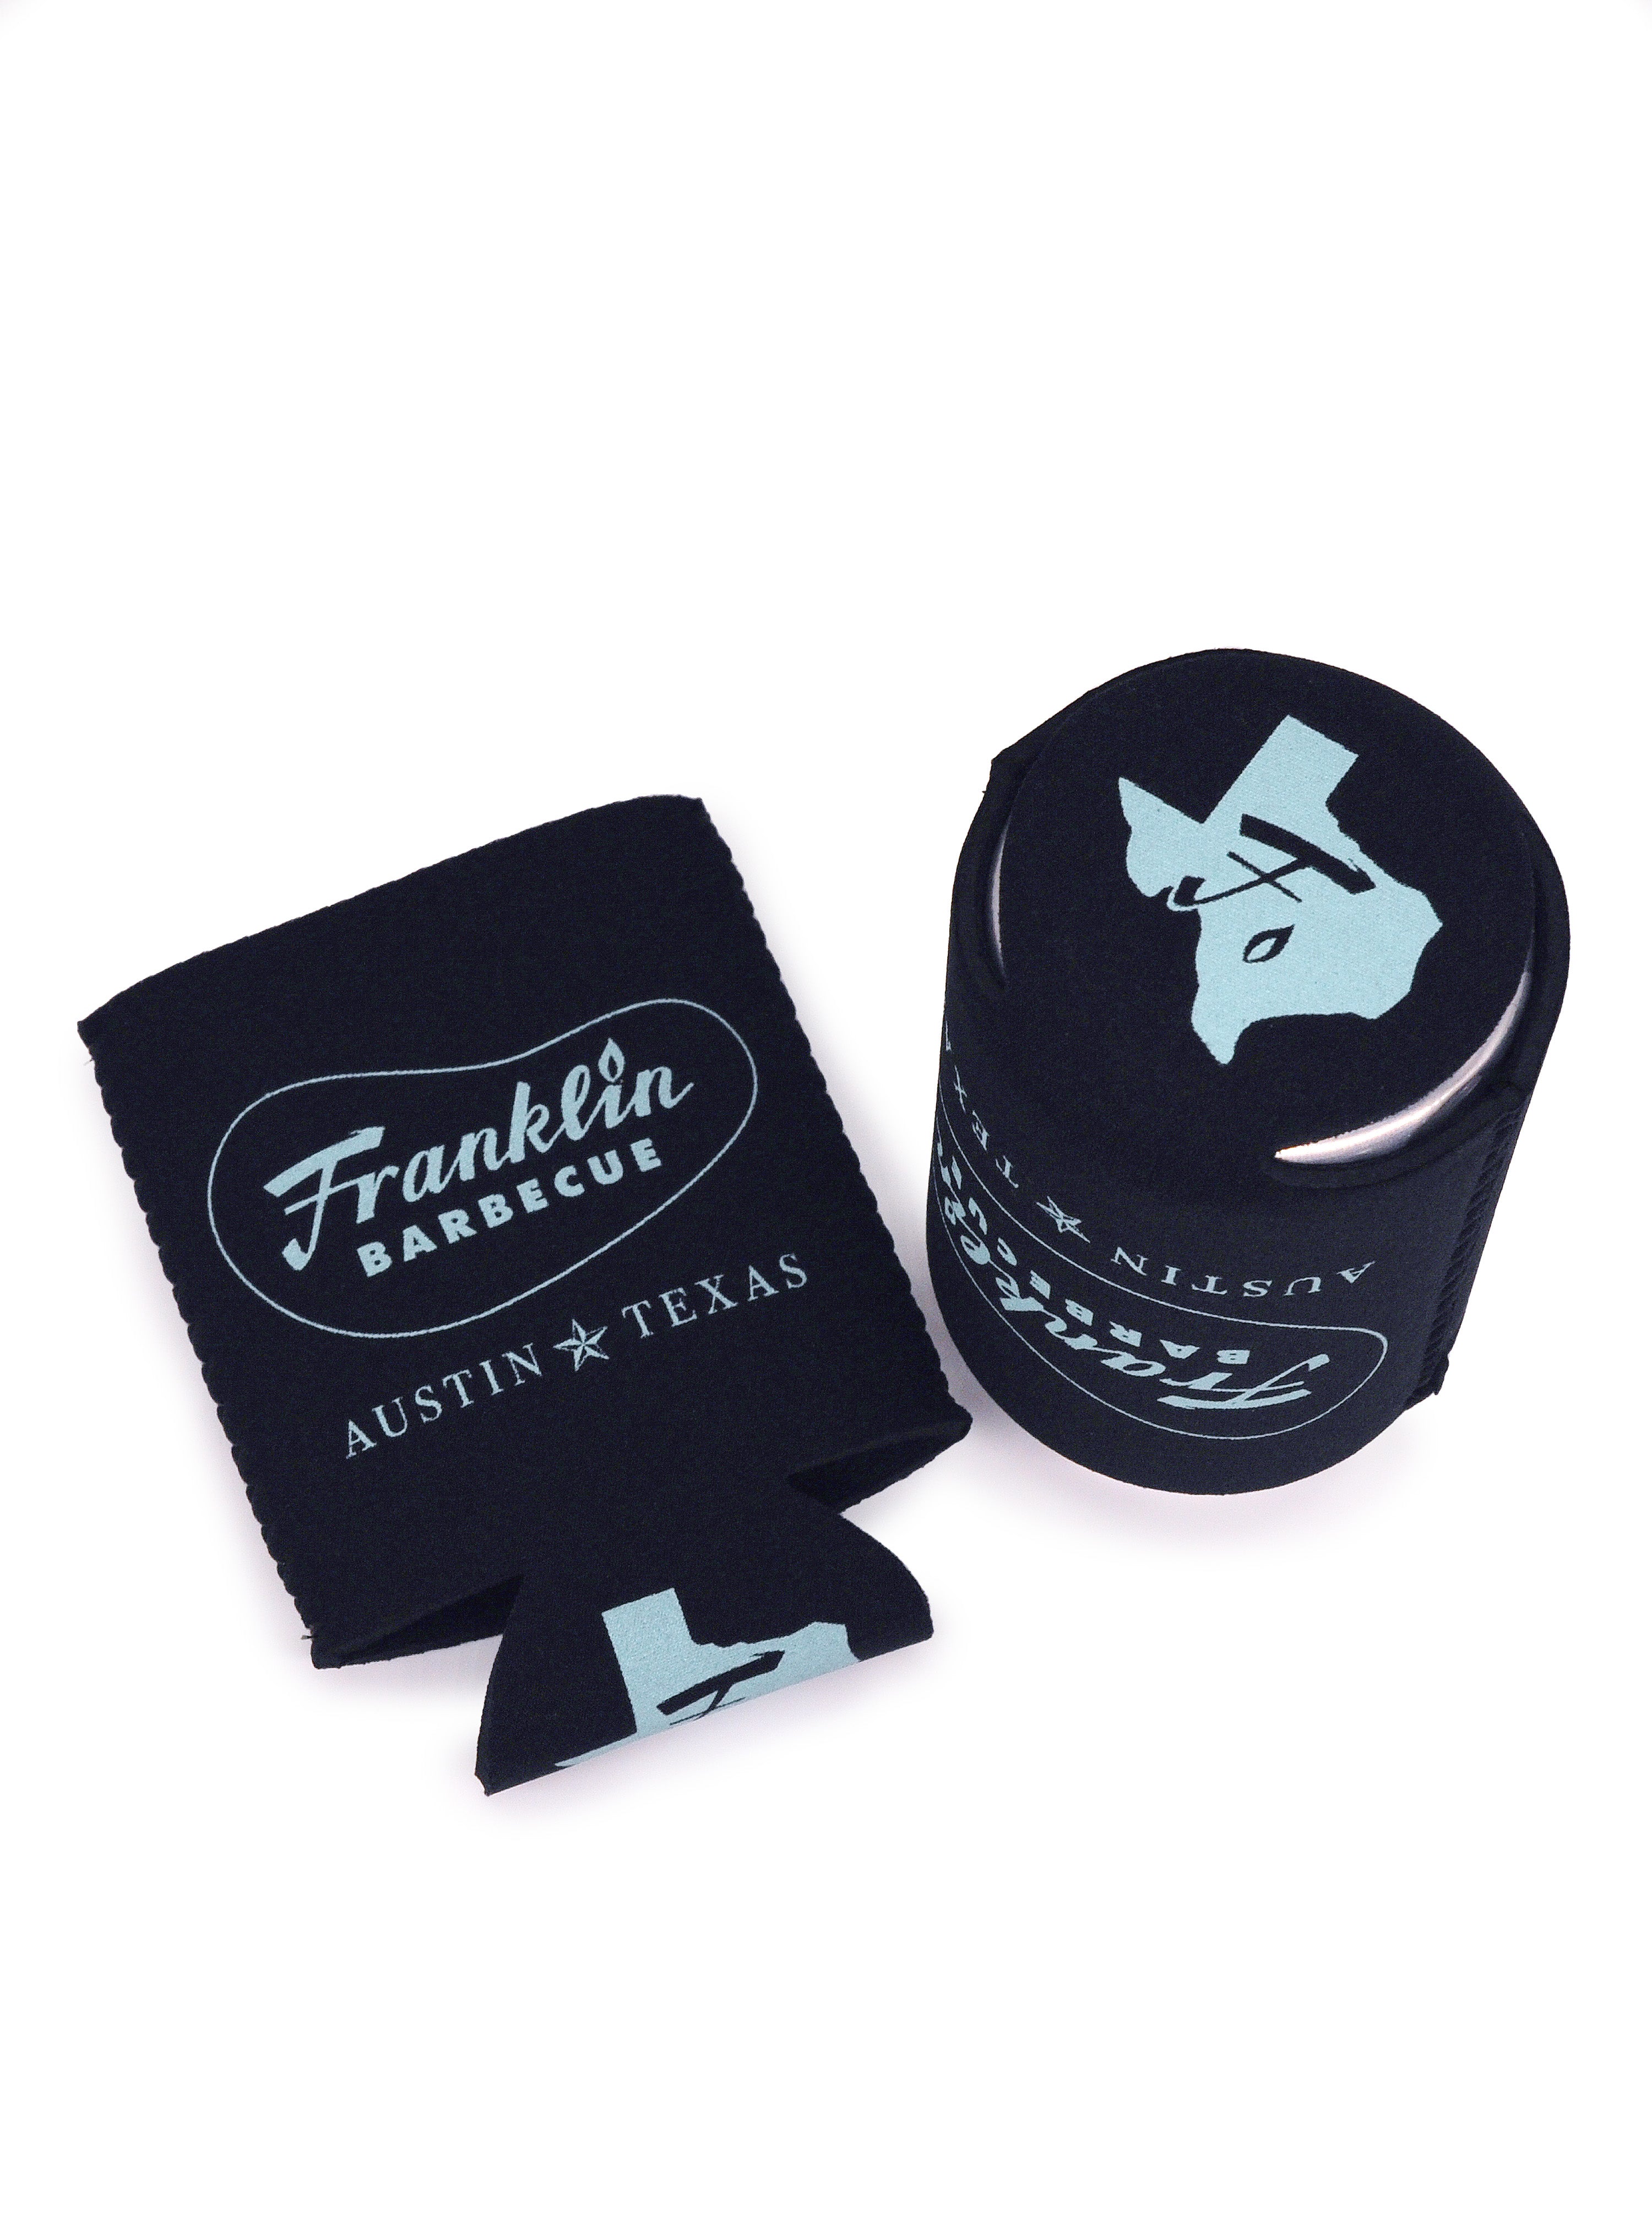 Two Black coldie holdie with Franklin Barbecue bean logo outlined in blue with Austin Texas below it also in blue; one is laid flat the other is shown with can inside displaying the bottom design of the shape of Texas in blue and Franklin 'F' in the middle